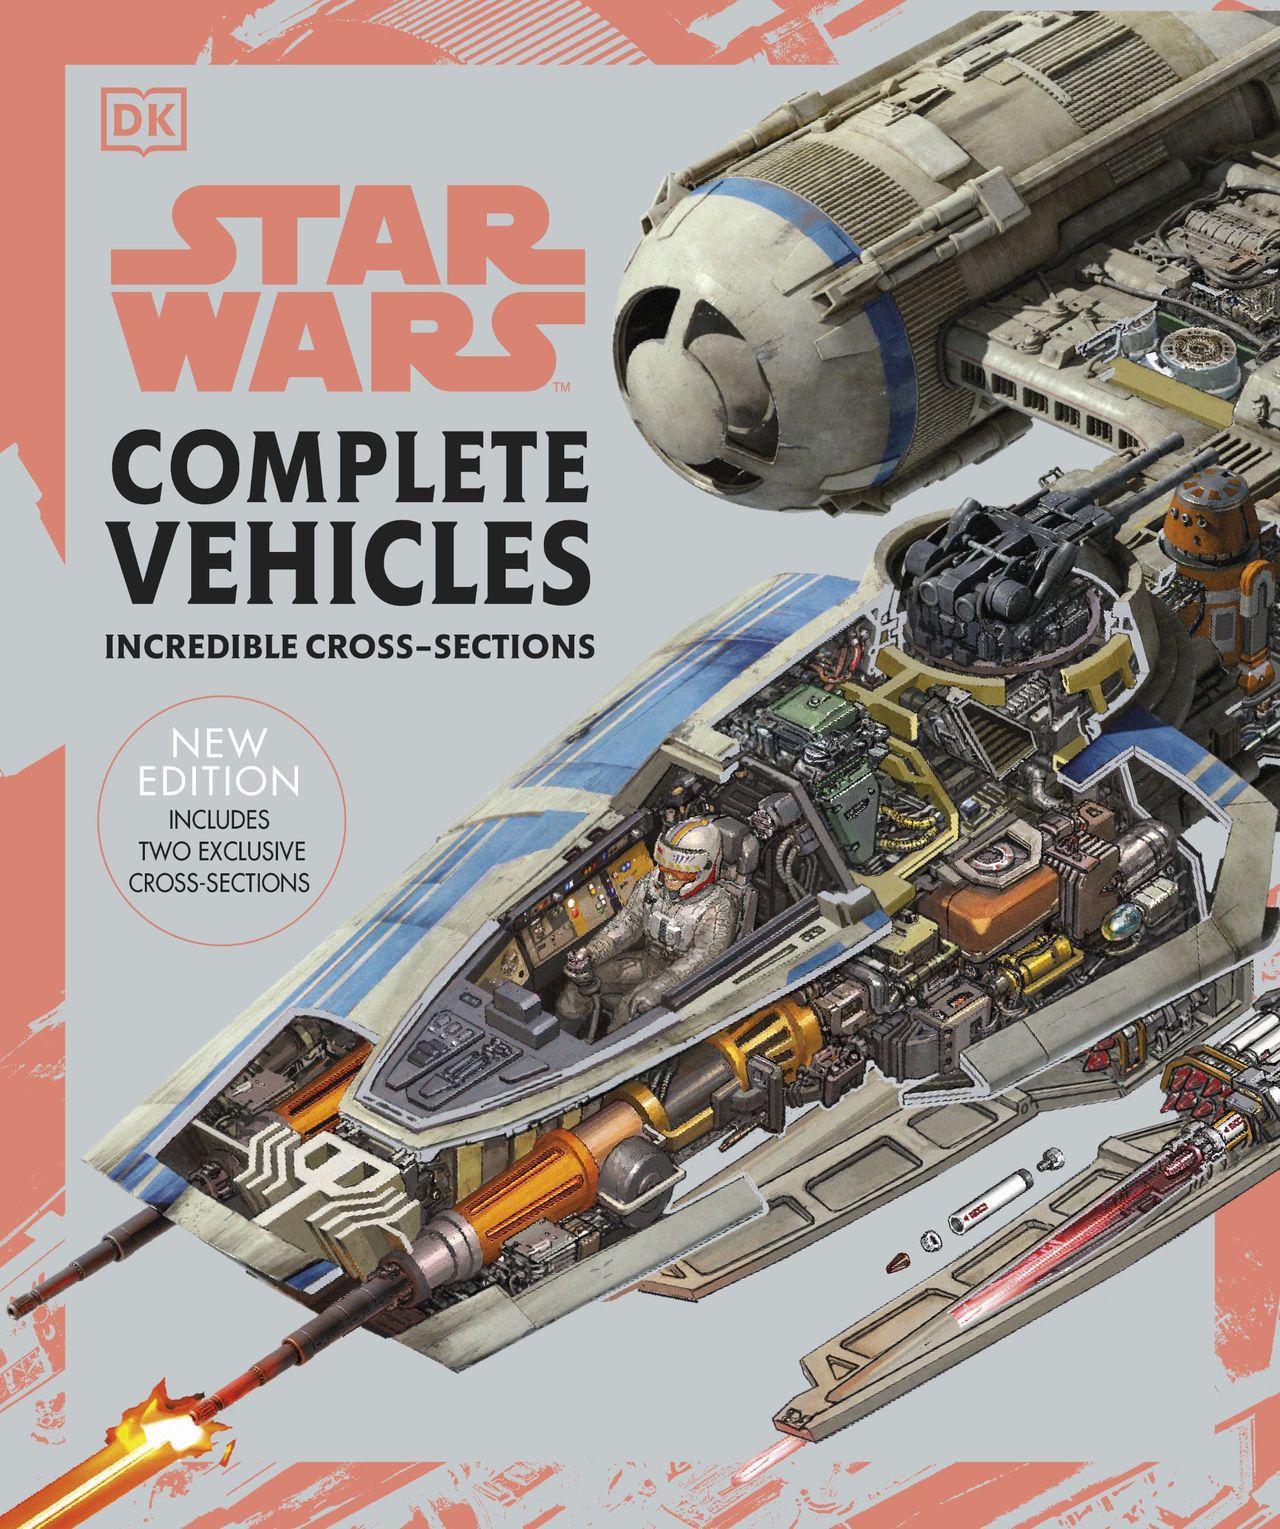 Star Wars Complete Vehicles - Incredible Cross-Sections - New Edition 1